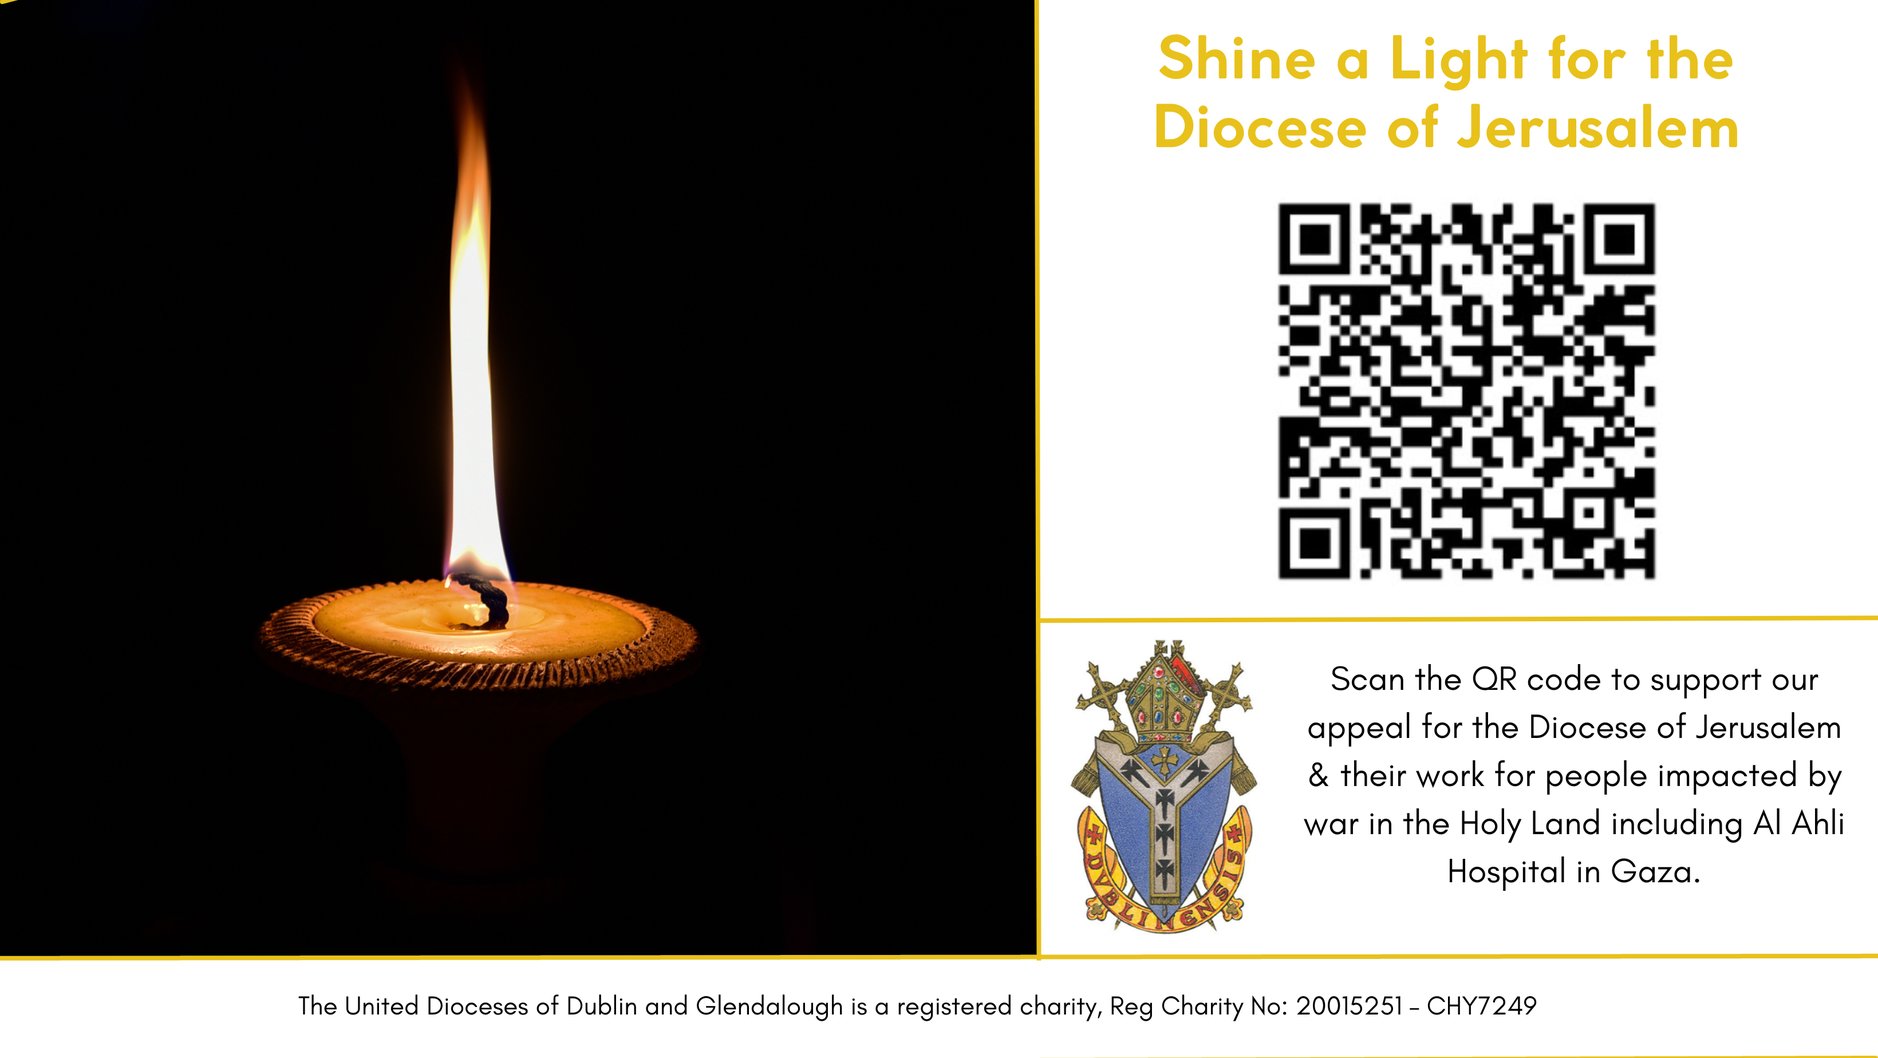 Diocese of Jerusalem Appeal - Shine a Light for the Diocese of Jerusalem – 

Details of how to donate to our appeal for the Diocese of Jerusalem in this time of war. 
Donations can be made to: Diocesan Funds of Dublin and Glendalough No 1 A/C Current Account, Bank of Ireland, 2 COLLEGE GREEN DUBLIN 2 IBAN: IE50 BOFI 9000 1769 3548 78, BIC: BOFIIE2D. Cheques may be sent to Diocesan Offices of Dublin and Glendalough, Church of Ireland House, Church Avenue, Rathmines, Dublin 6, D06 CF67. All funds will go directly to our partner Diocese of Jerusalem. 